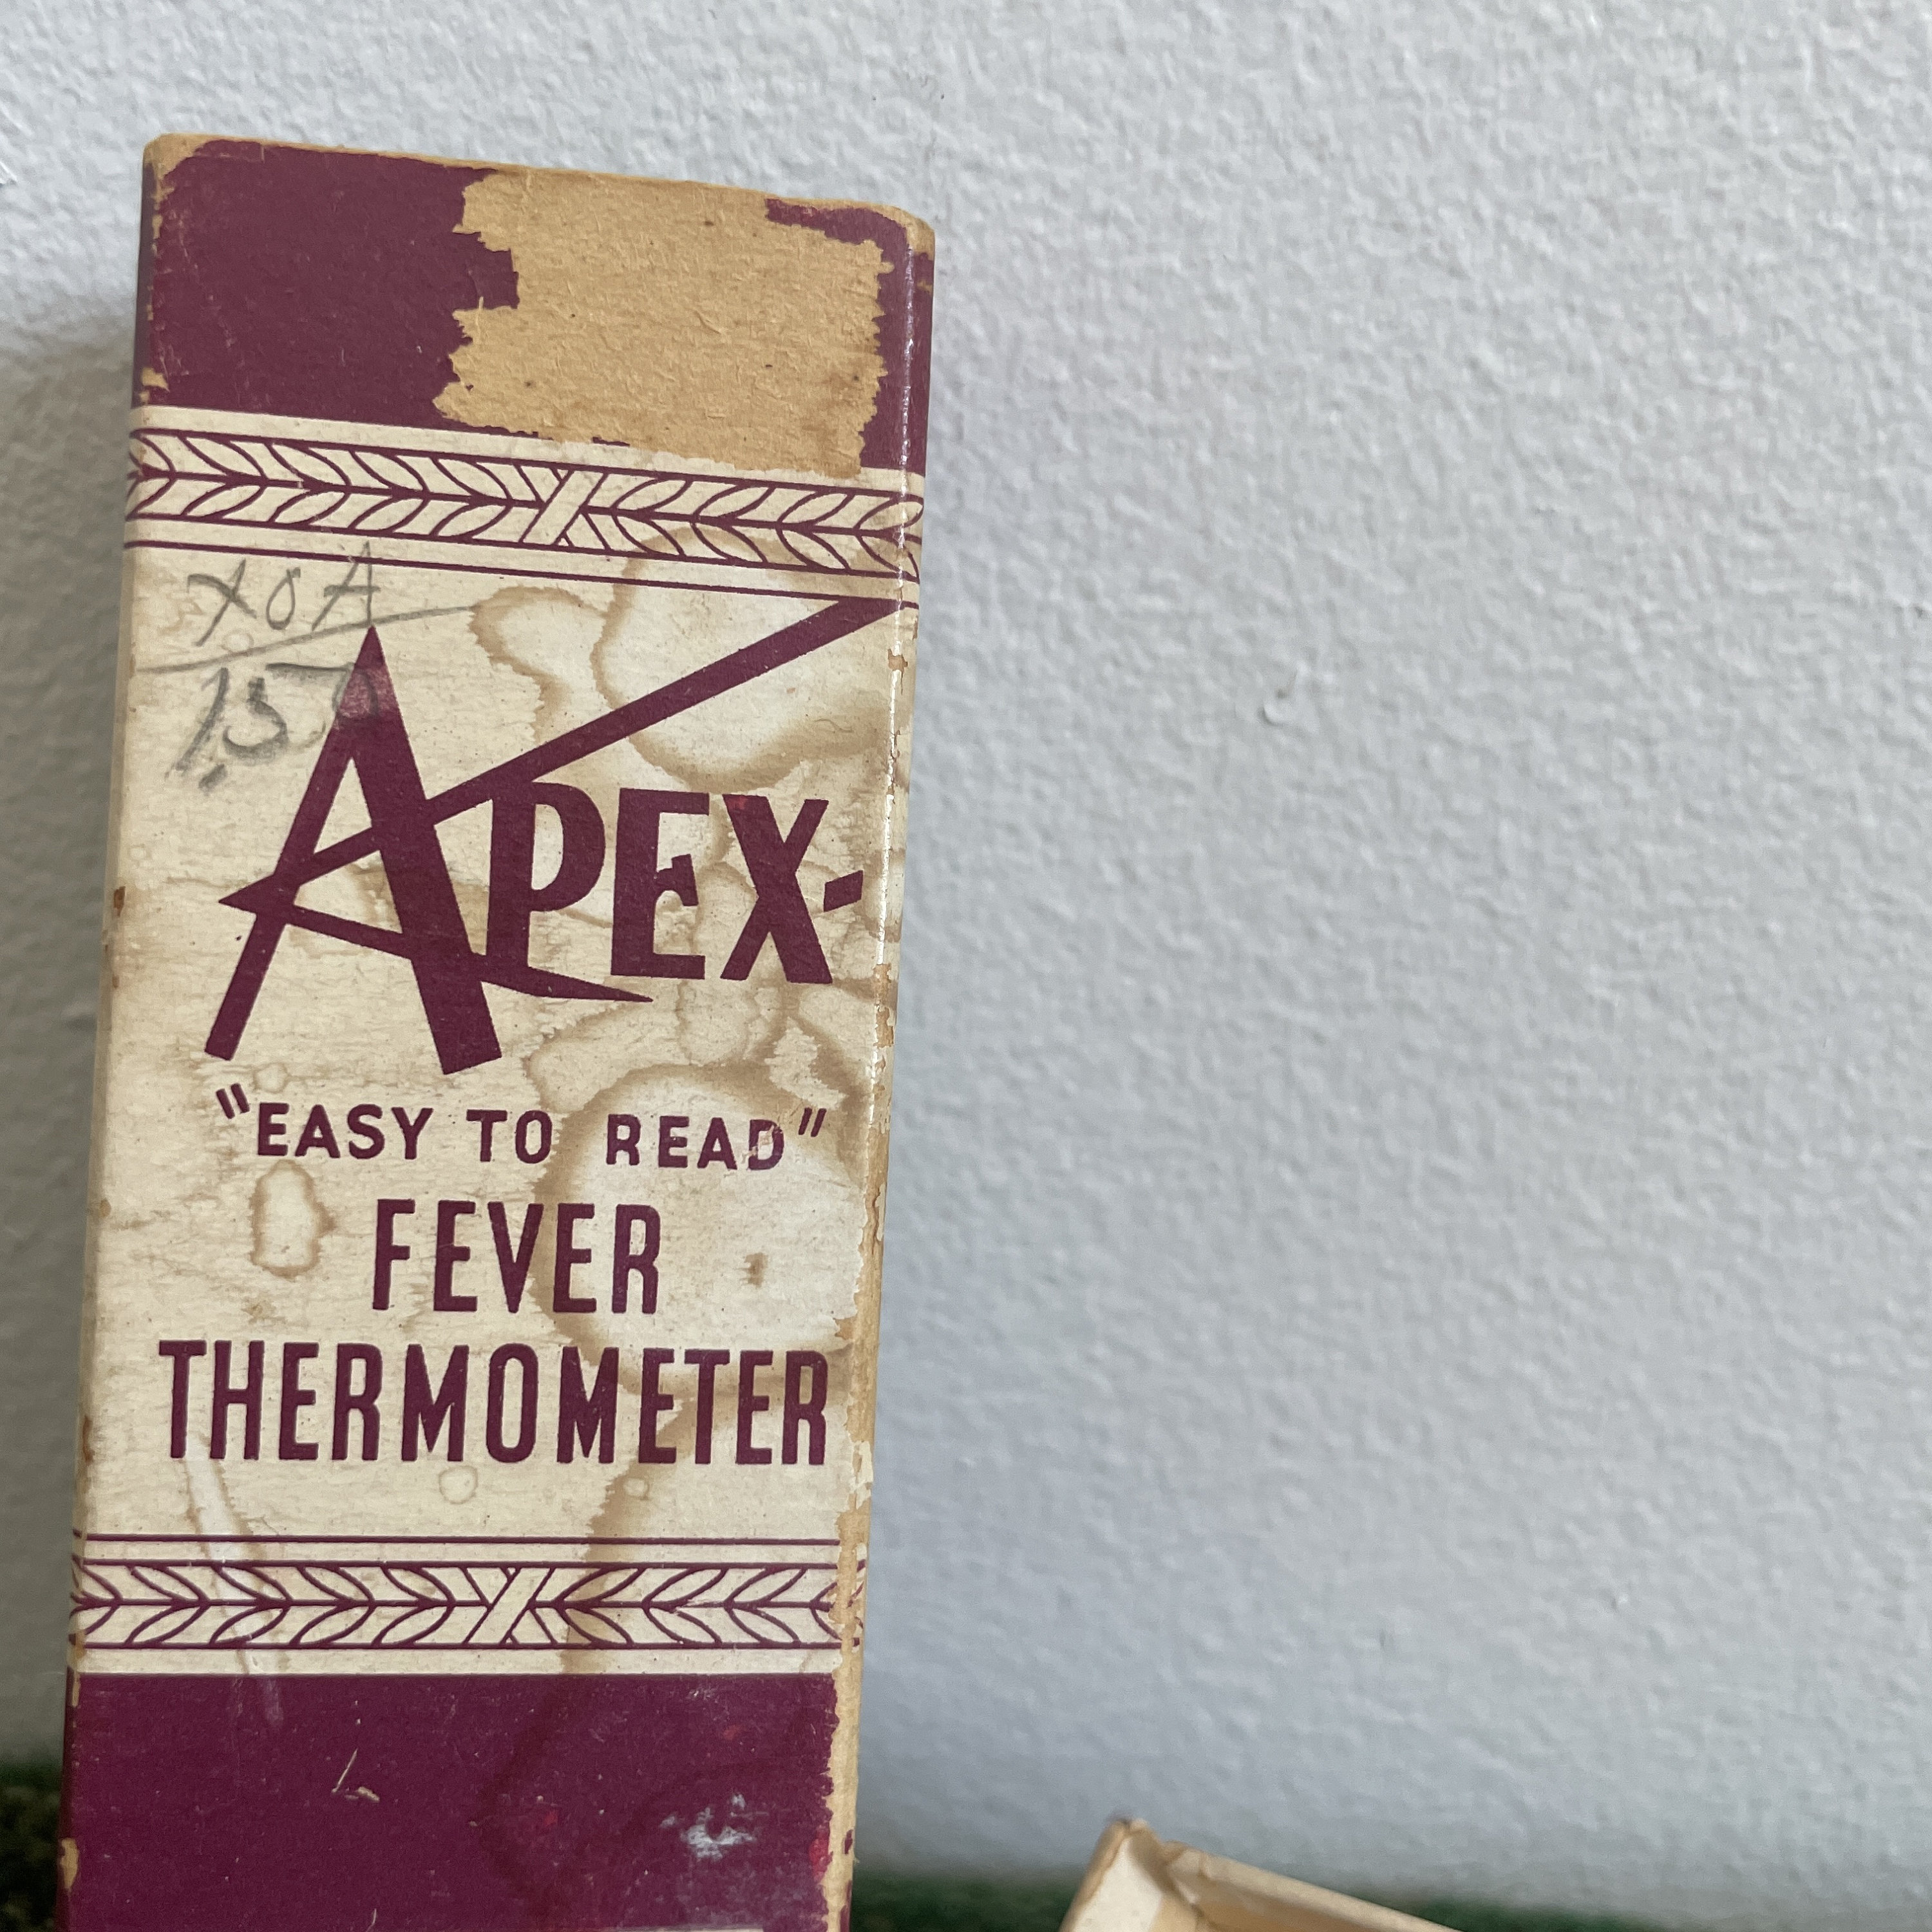 Apex Thermometer Covers